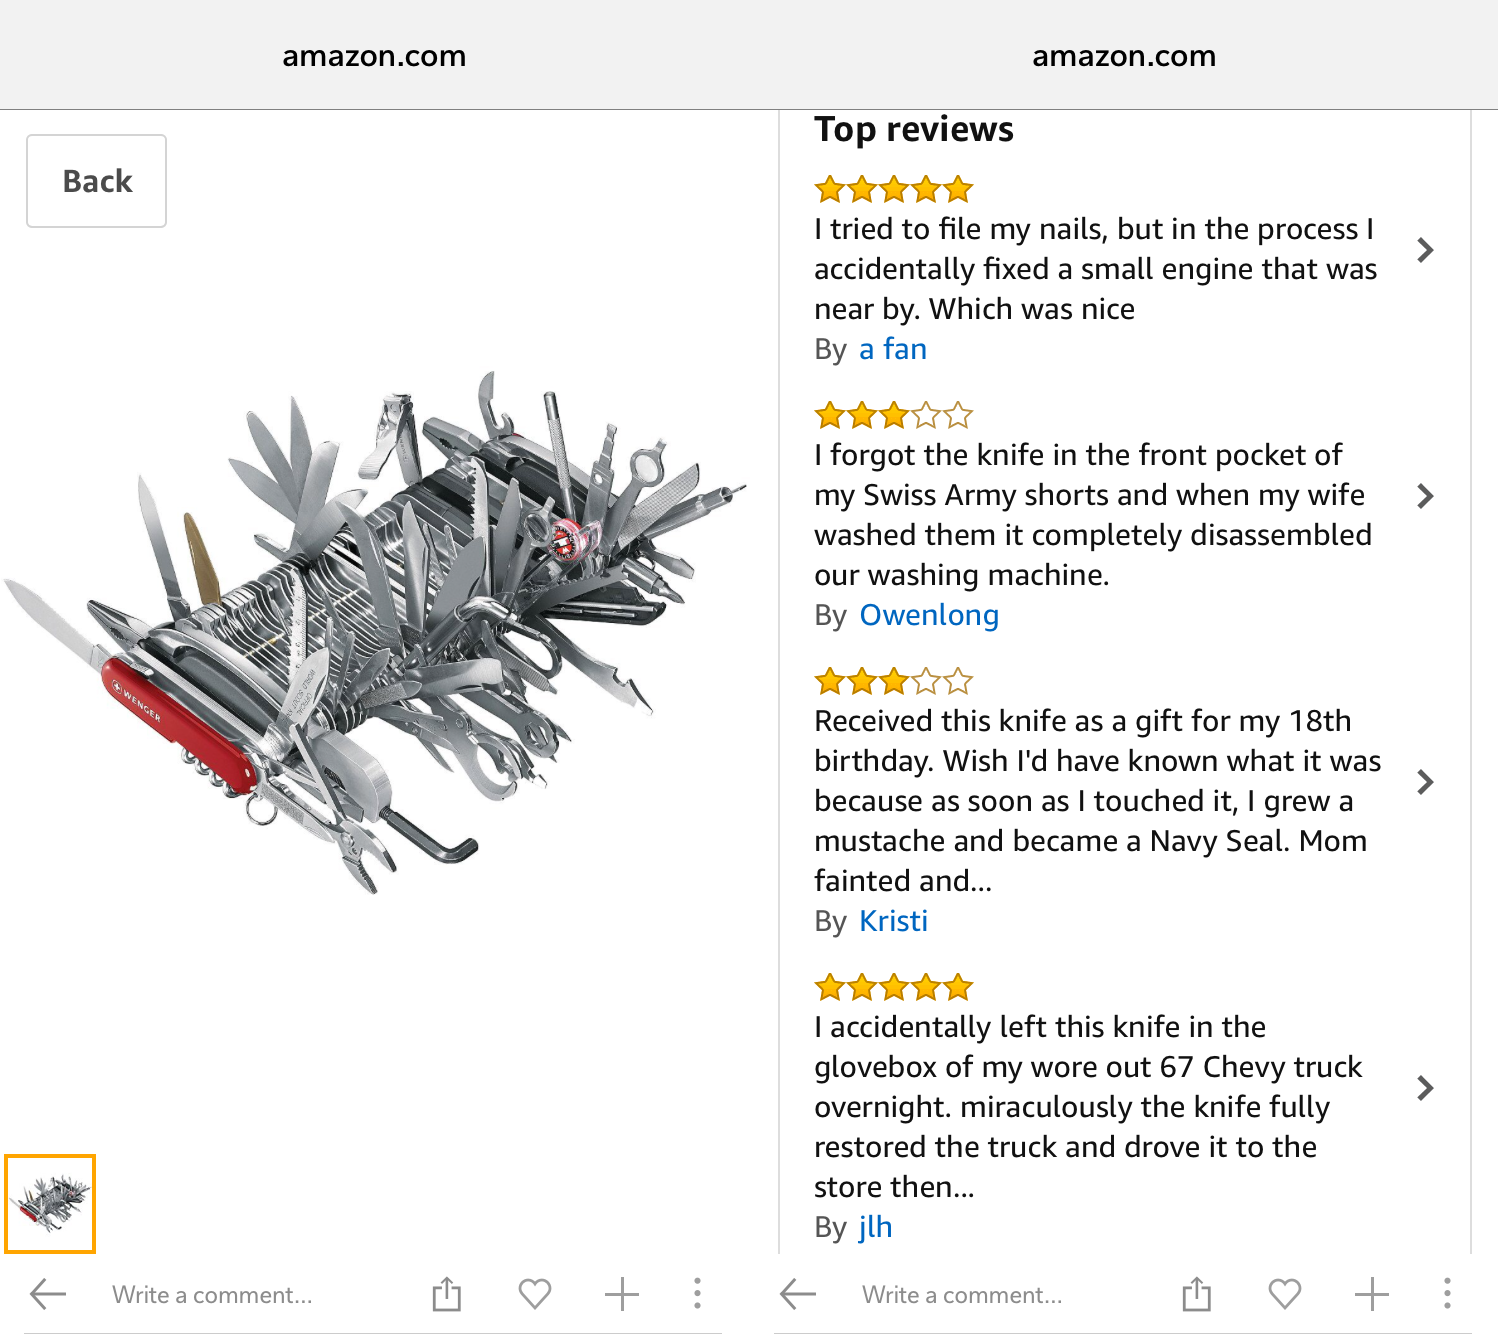 $1500 Swiss Army knife, reviews are the best